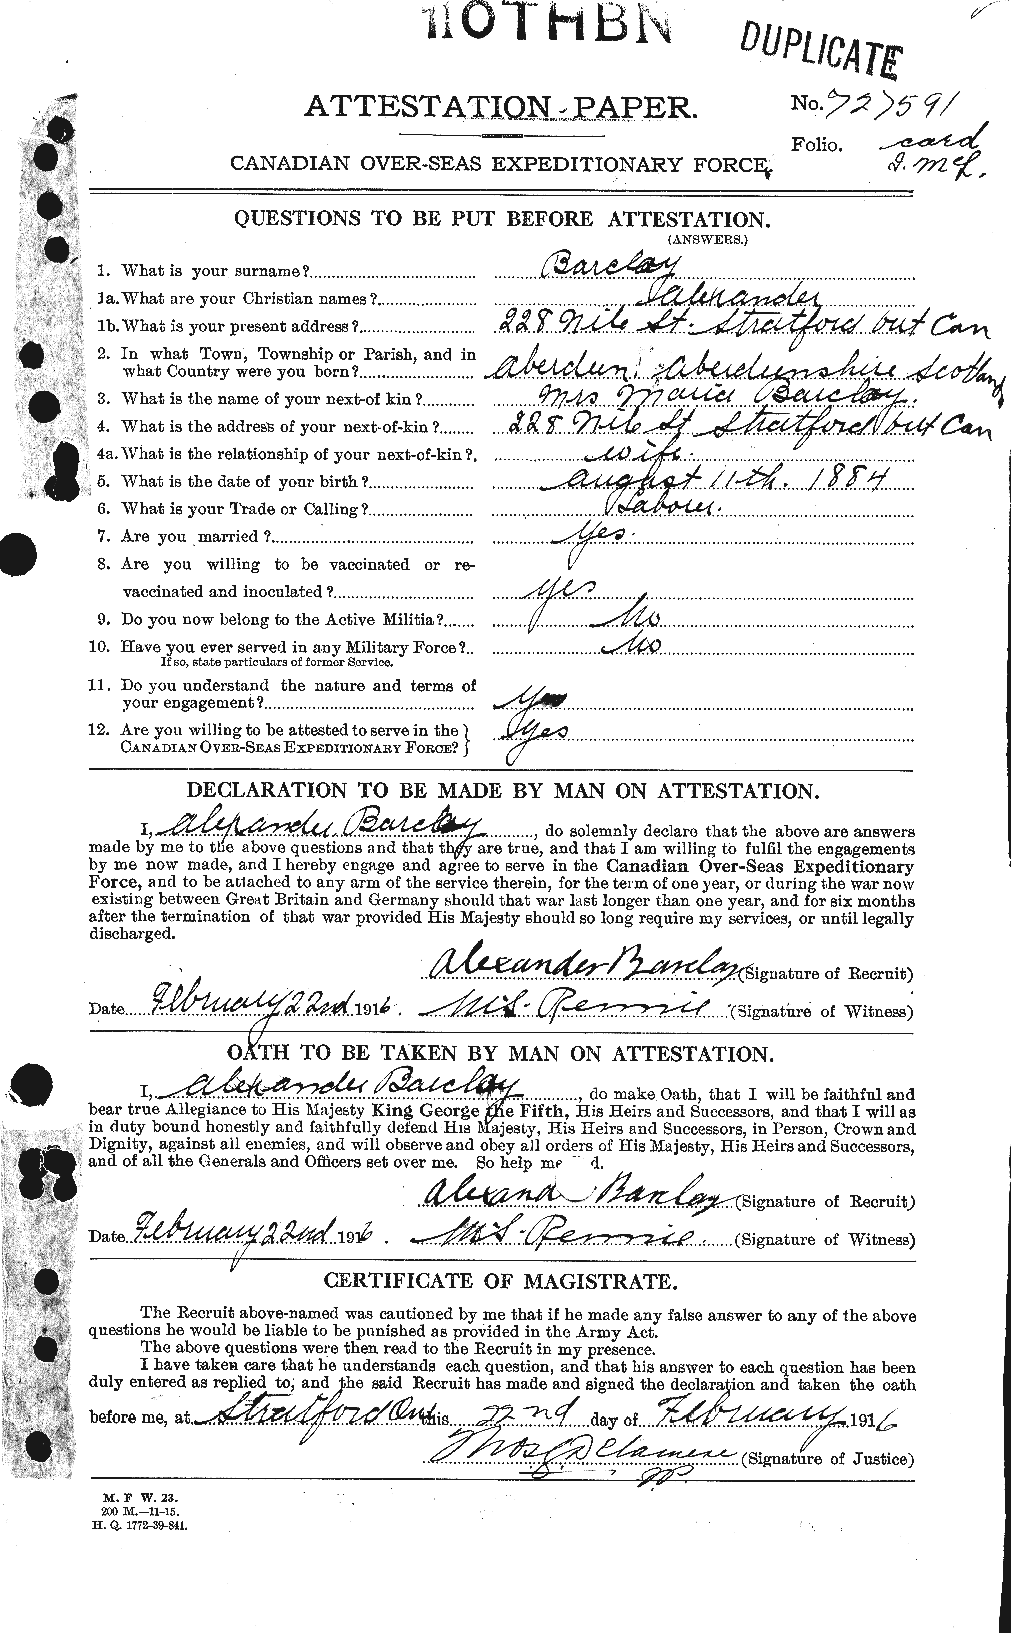 Personnel Records of the First World War - CEF 220968a